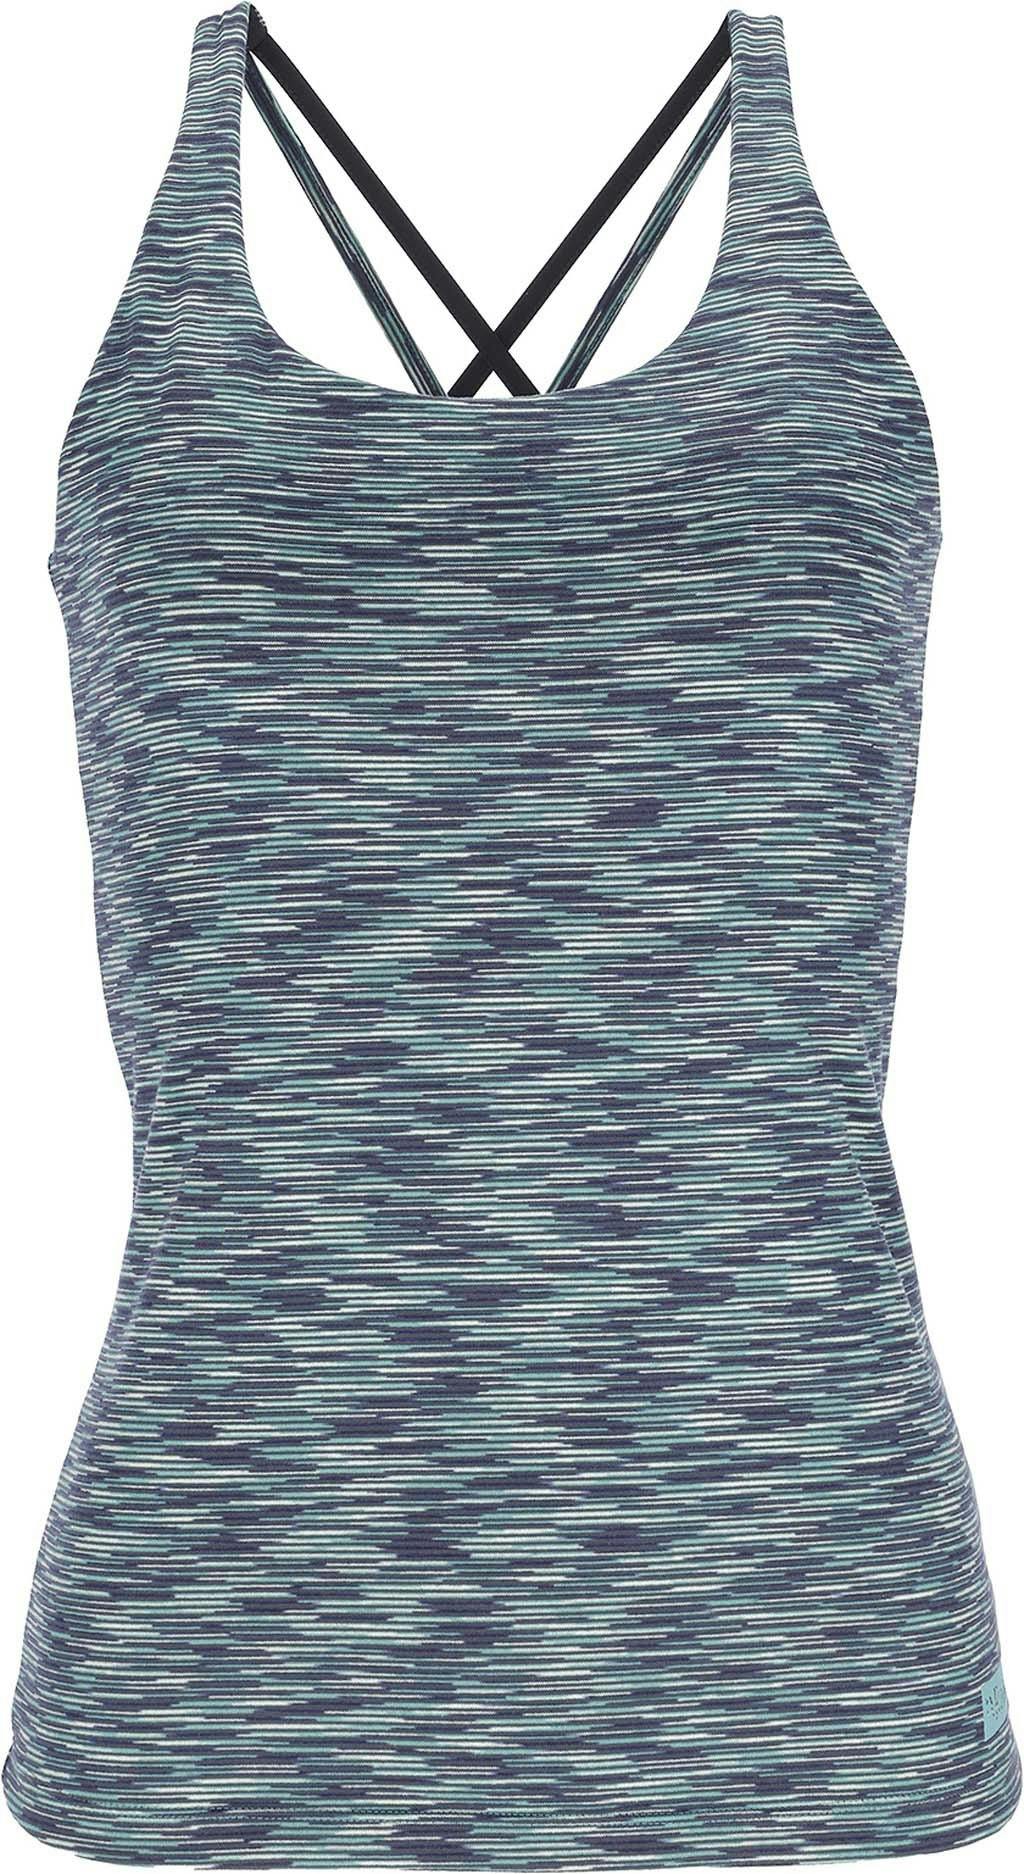 Product image for Lineal Tank Top - Women's